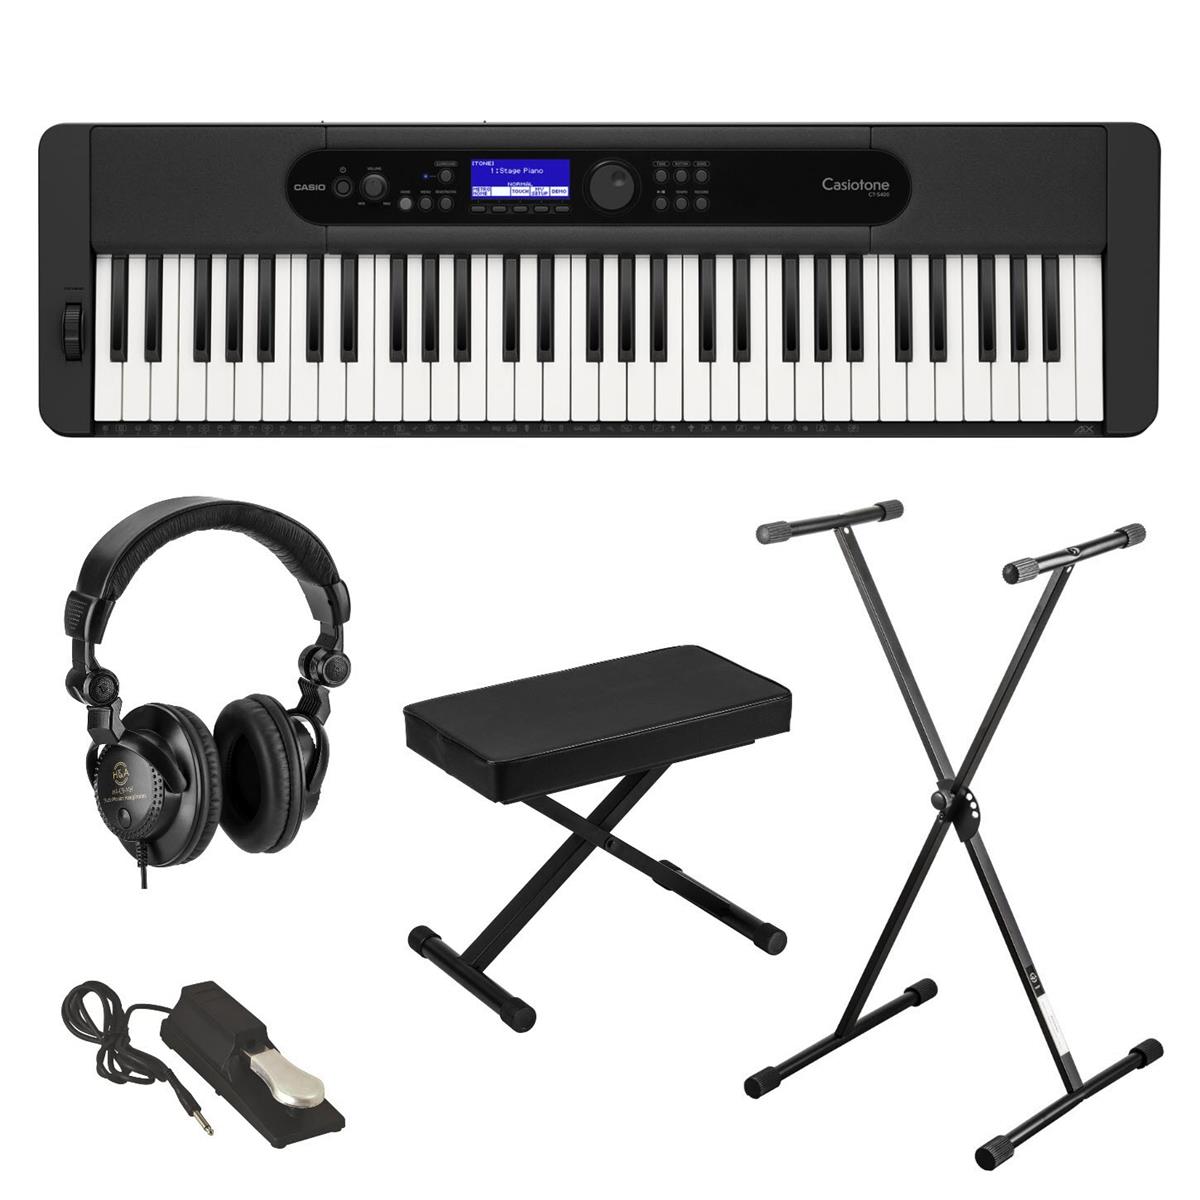 

Casio Casiotone CT-S400 61-Key Portable Keyboard, Black with Accessories Kit